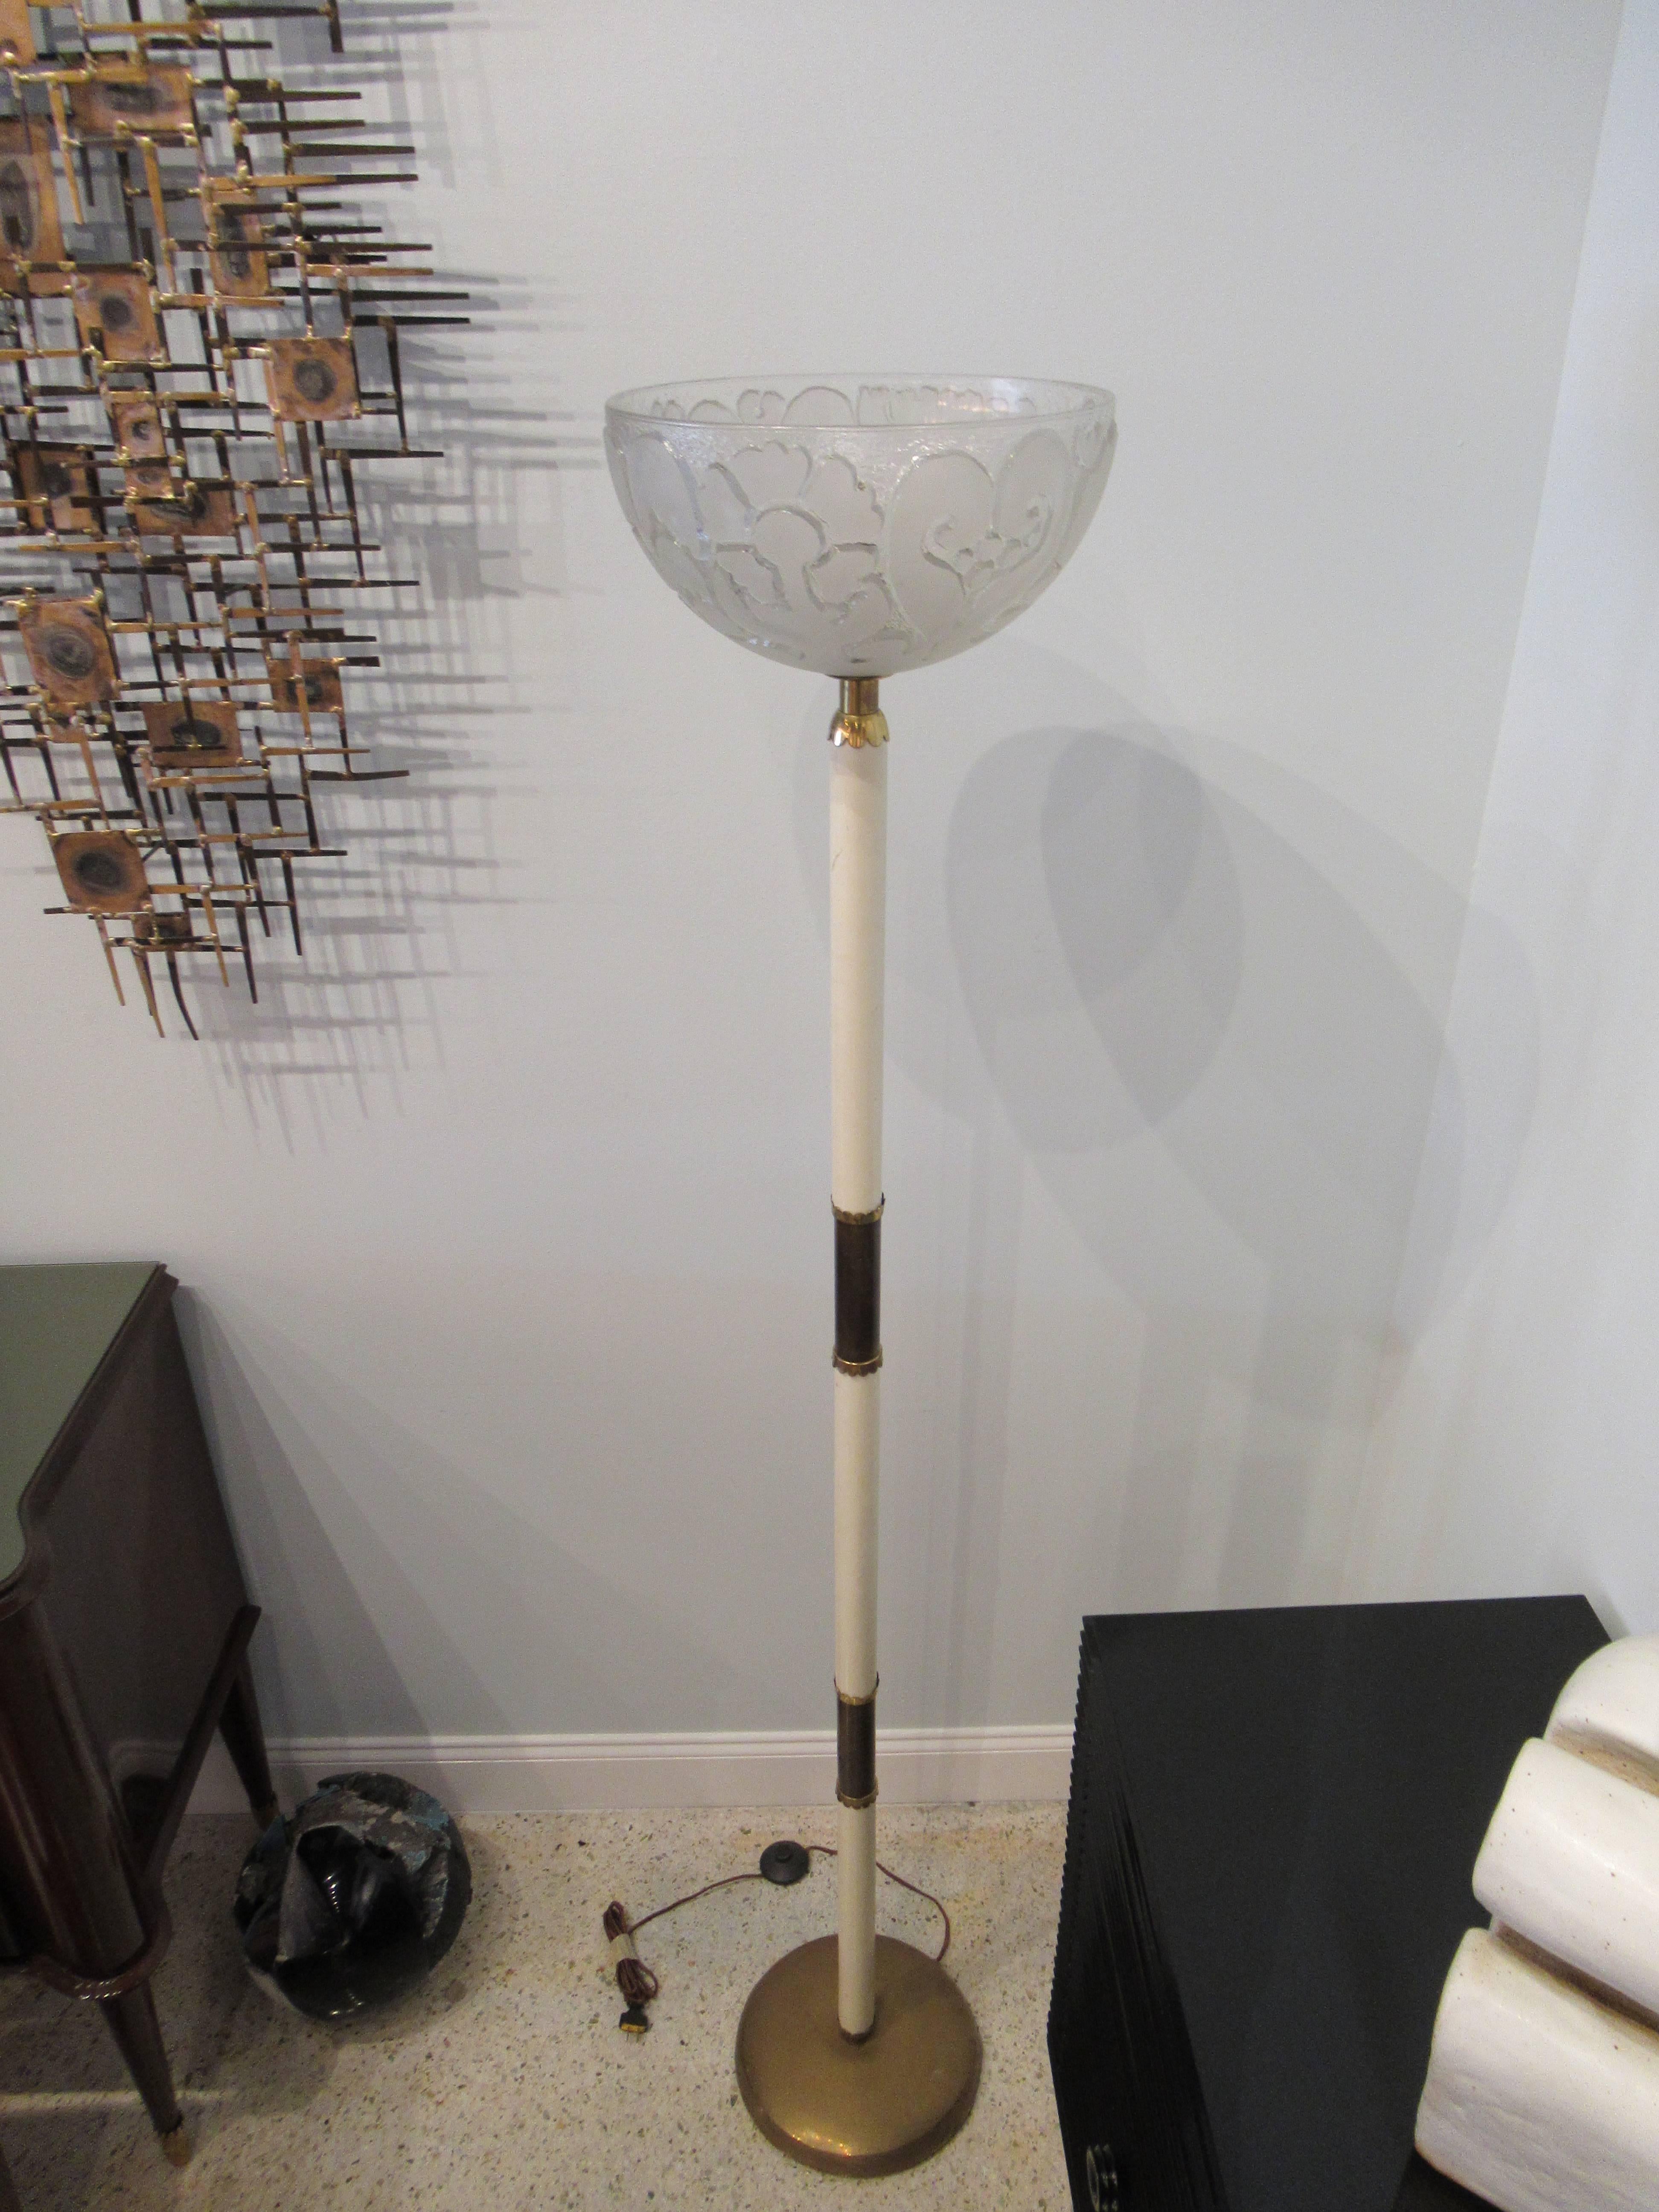 Fine Italian Modern Parchment, Brass and Glass Floor Lamp, Sabino, 1950s For Sale 3